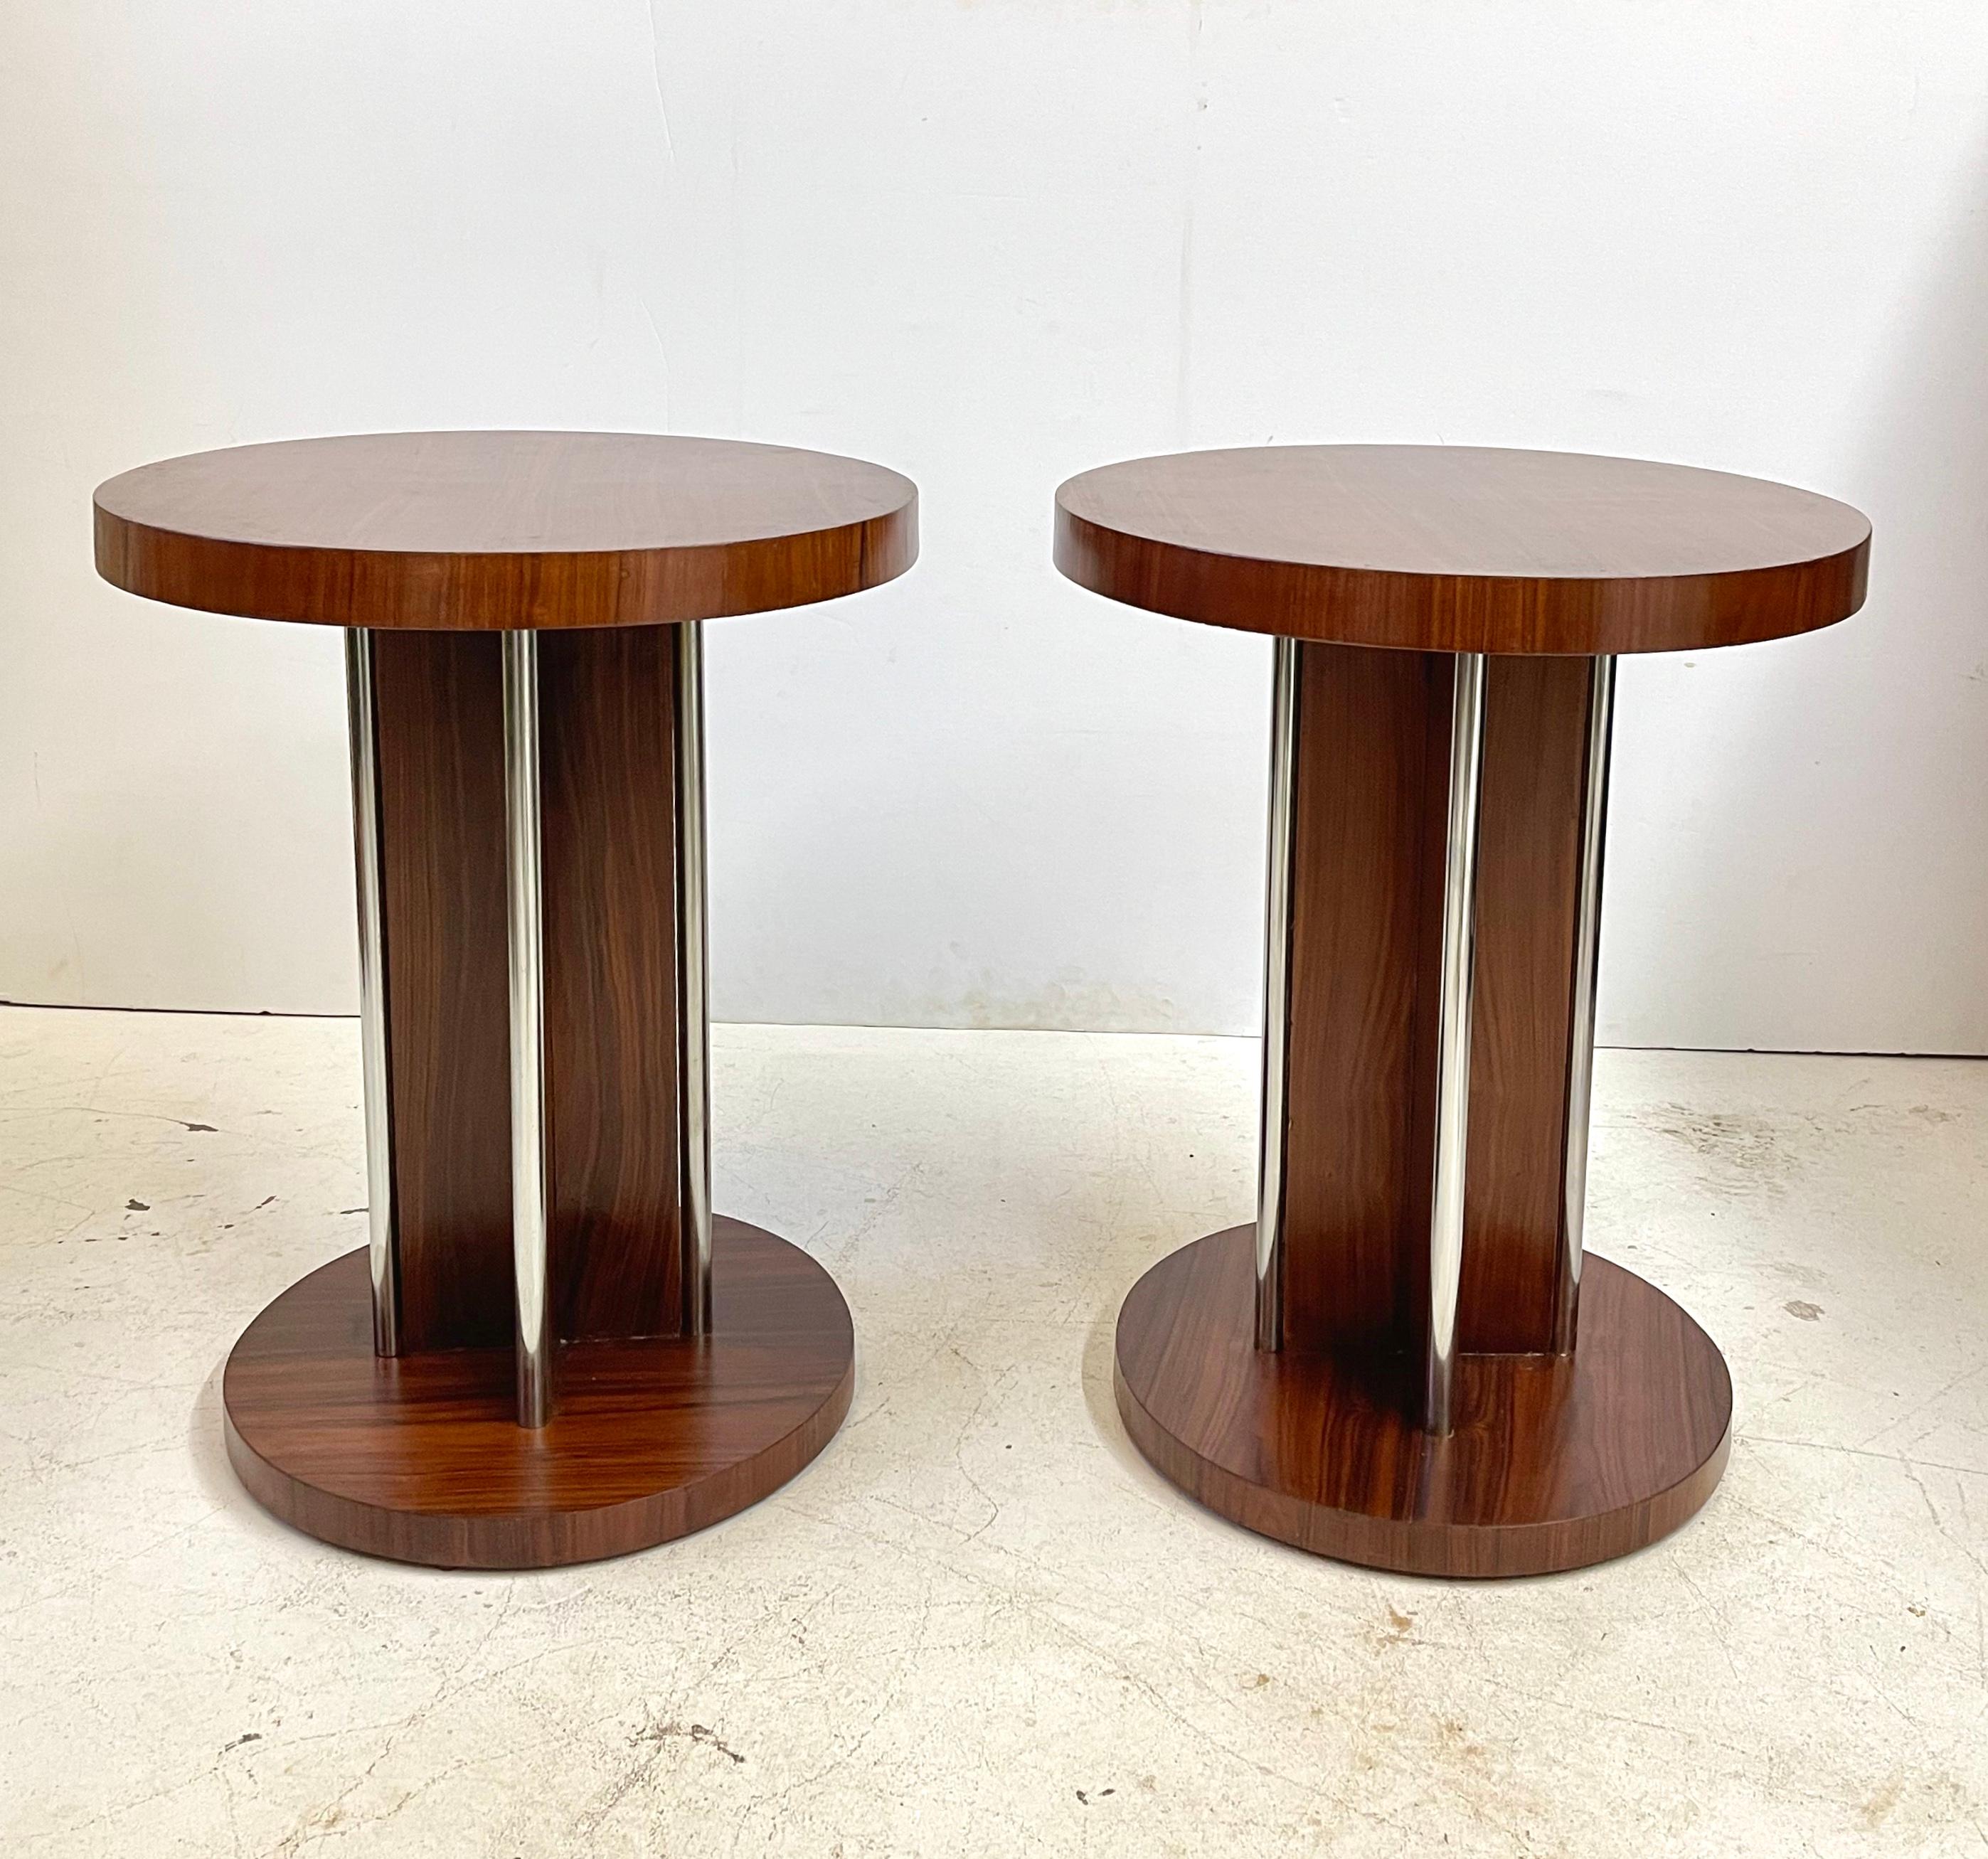 Pair of 20th century Italian cylindrical, pedestal form end tables in the Art Deco style. The tables are veneered in beautiful rosewood and accented by chrome fittings.